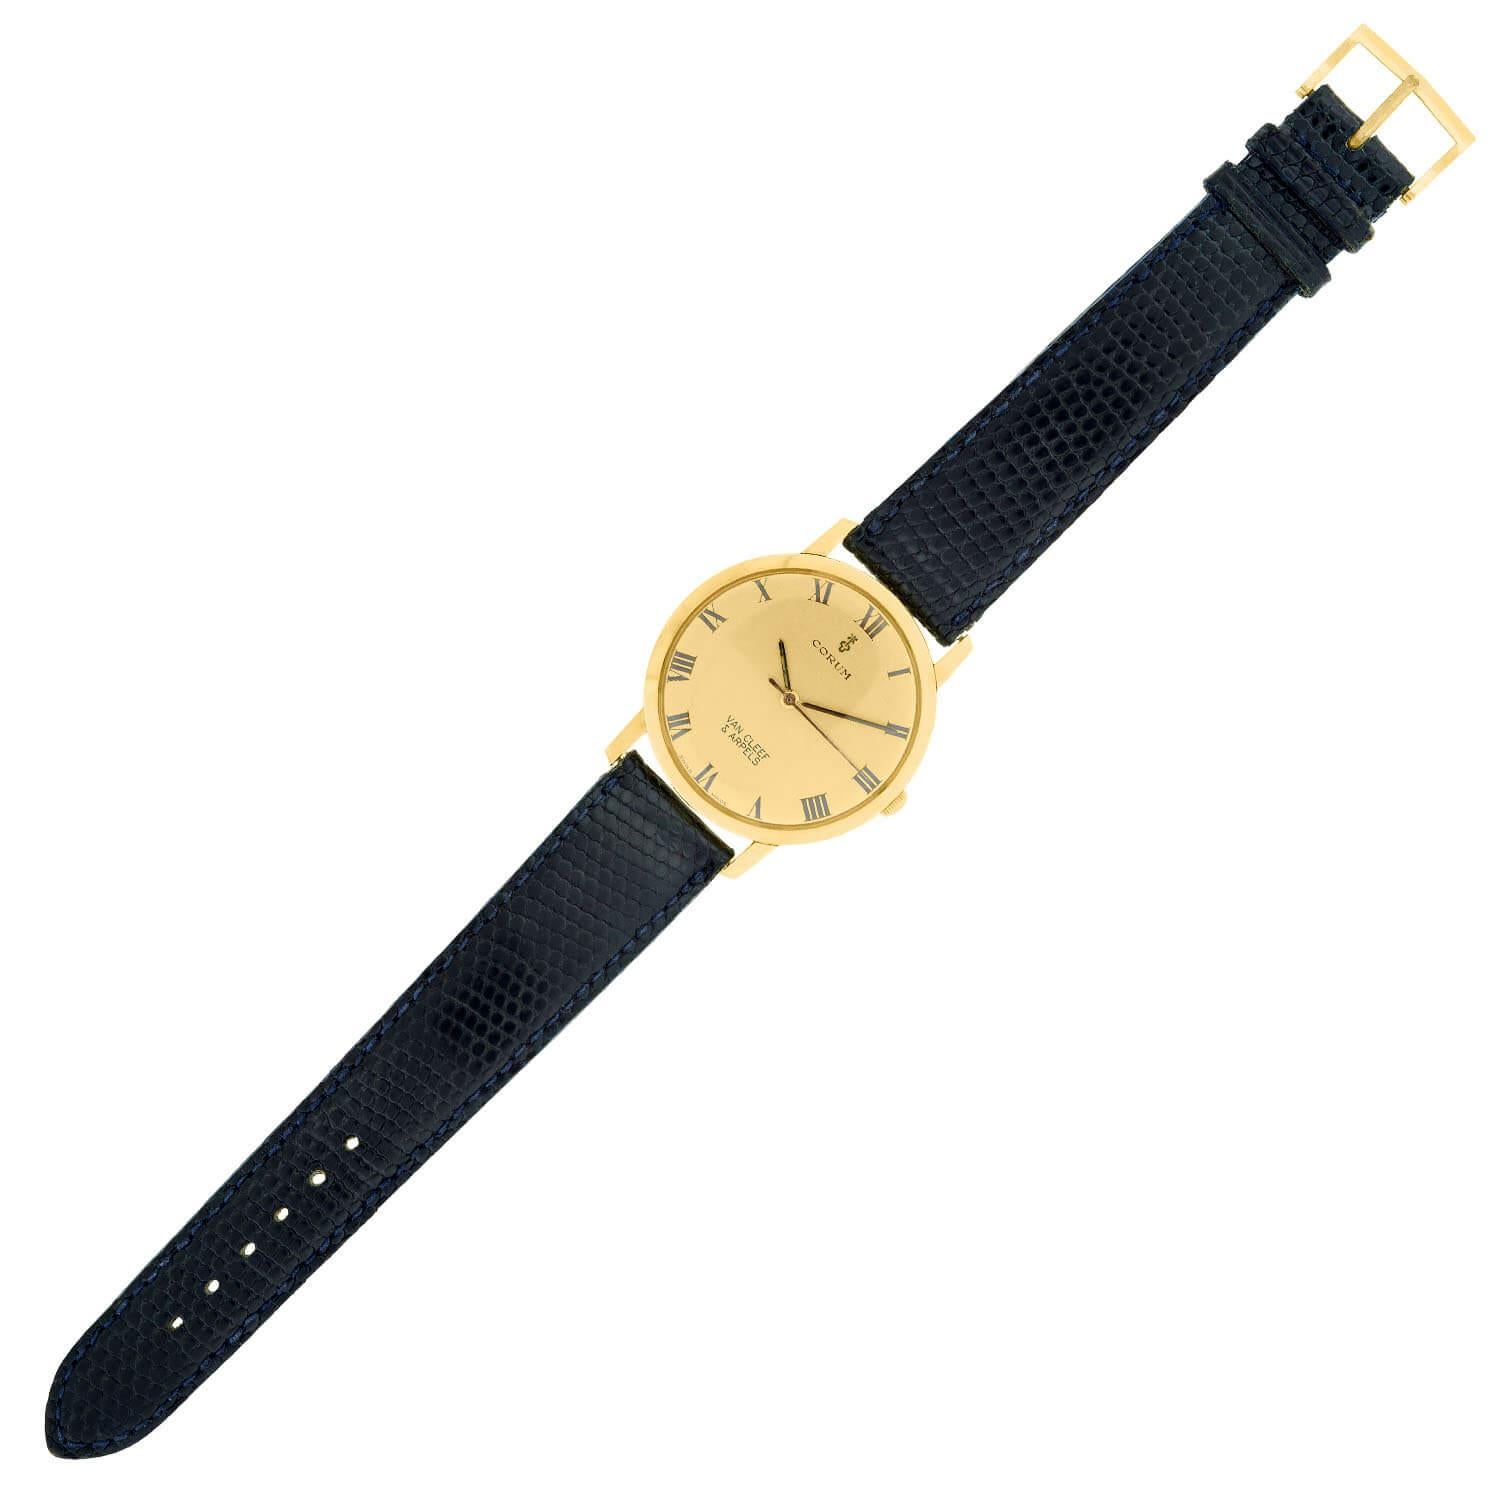 An incredible gold watch from watchmaker Corum for the luxurious designer Van Cleef & Arpels﻿, most likely from the 1960s! This vibrant 18kt yellow gold timepiece displays a classic appeal. The watch's face is comprised of a textured gold face with